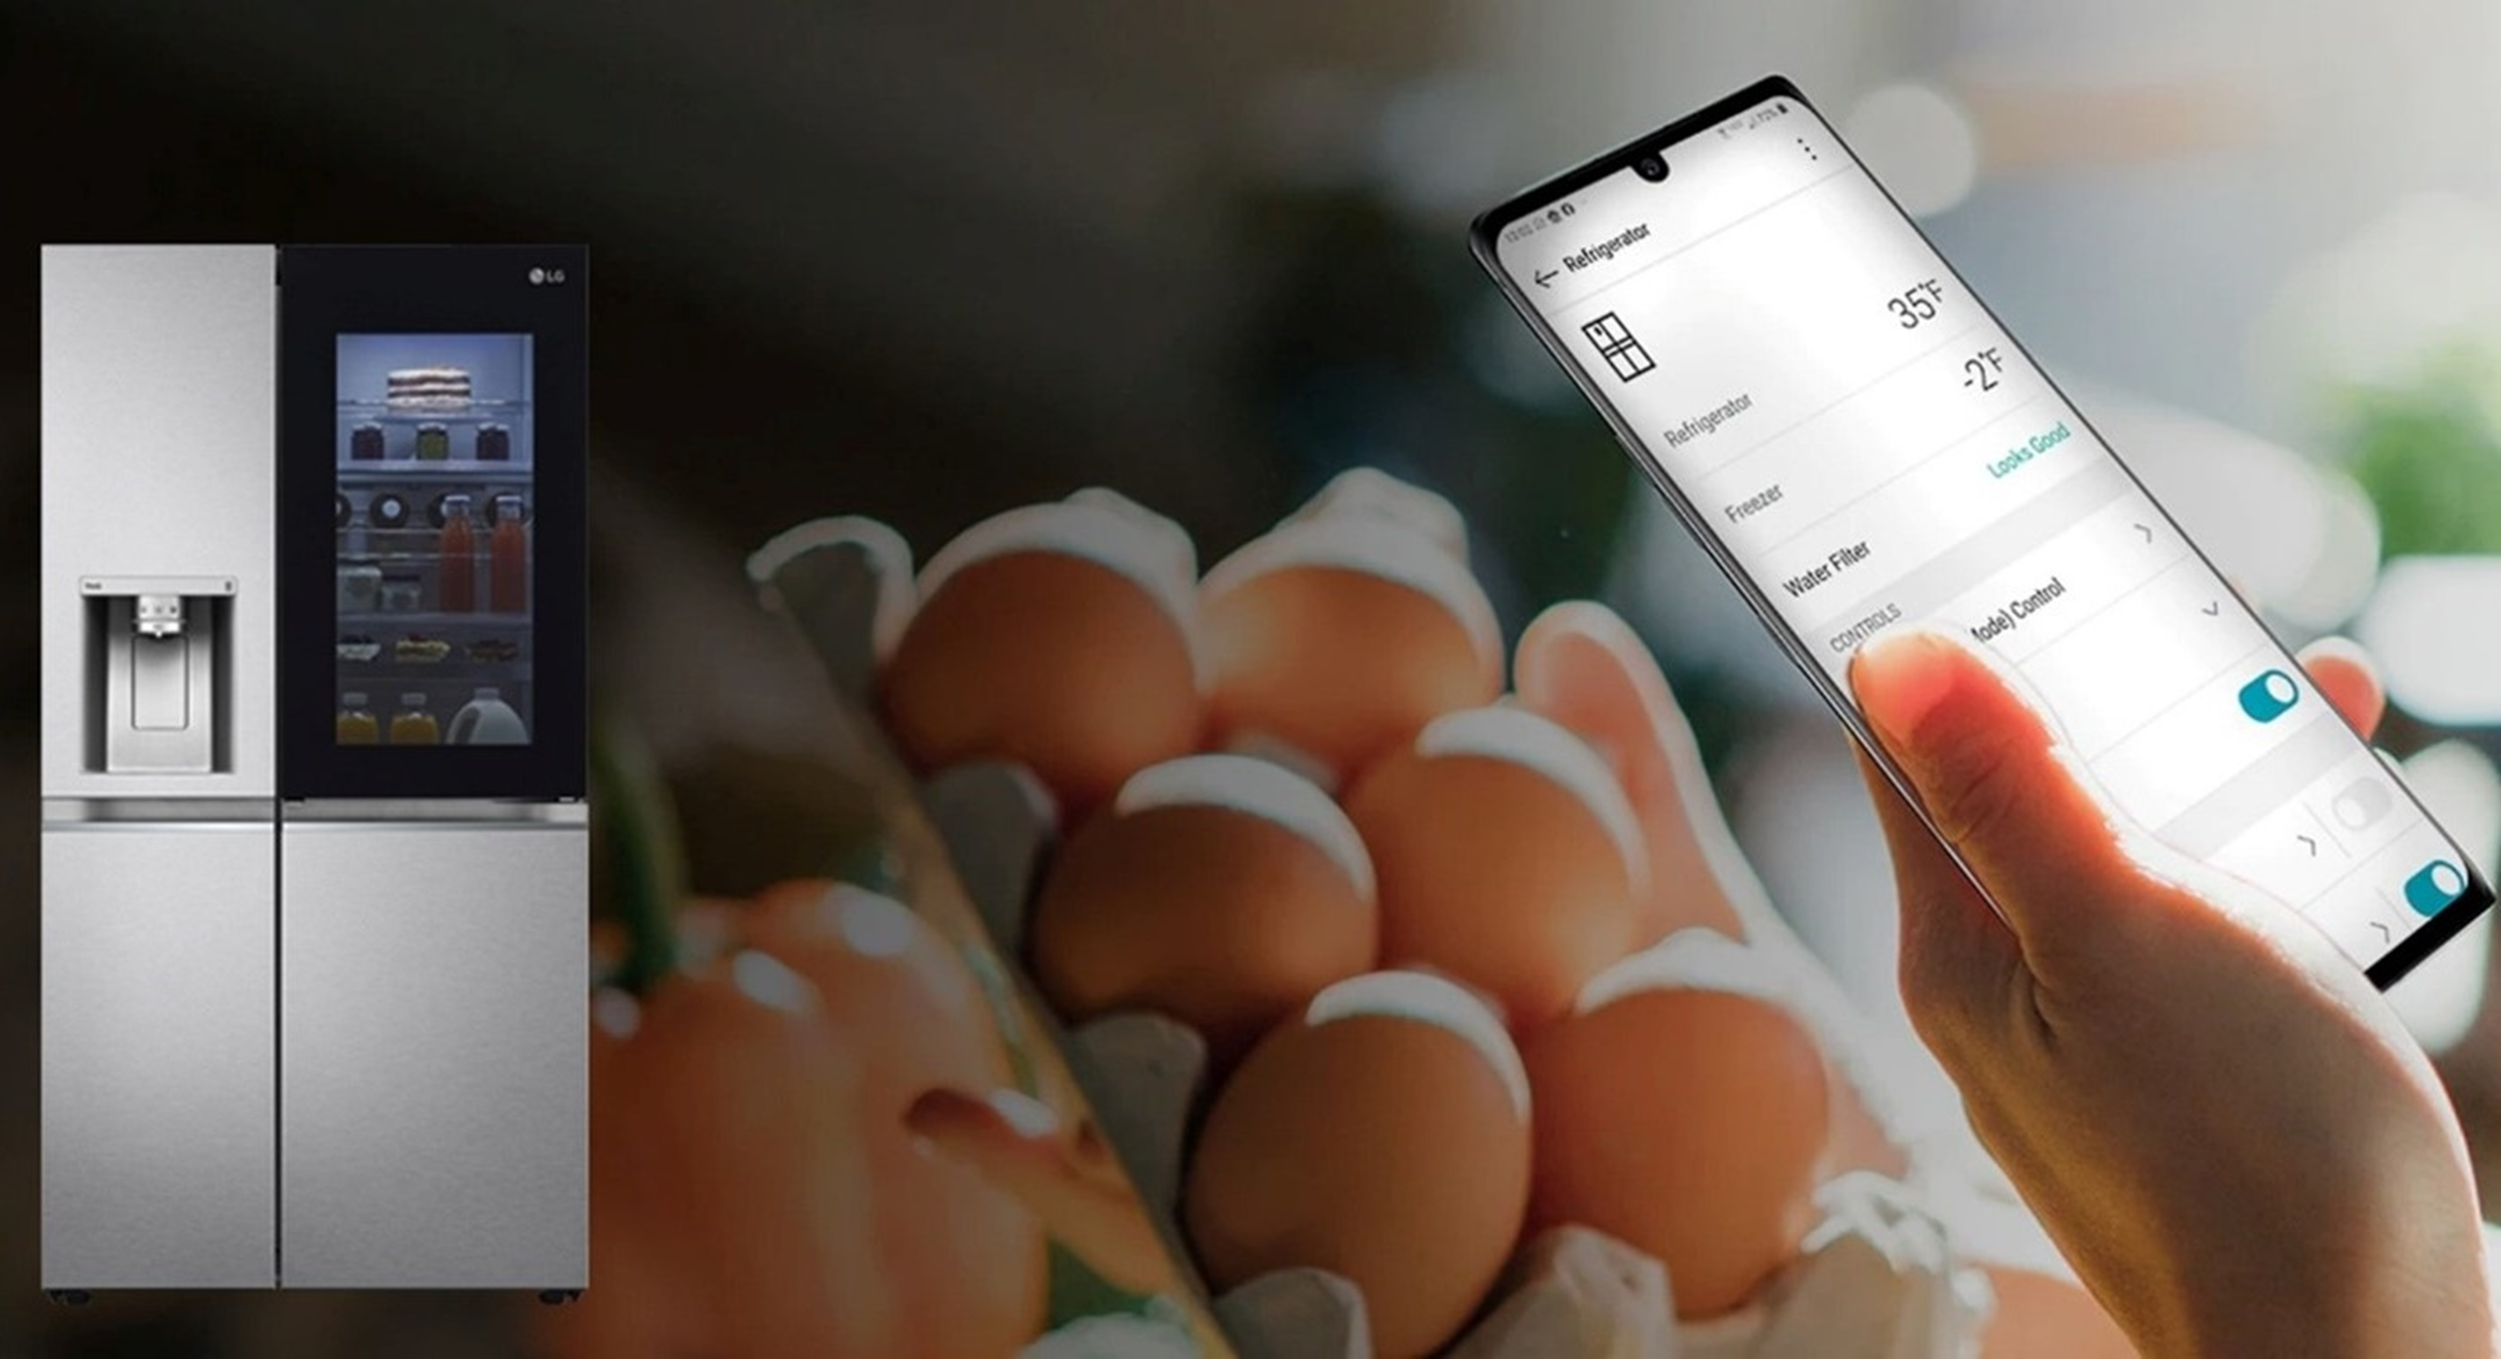 A picture of LG InstaView, a box of eggs and a smartphone with LG ThinQ app on